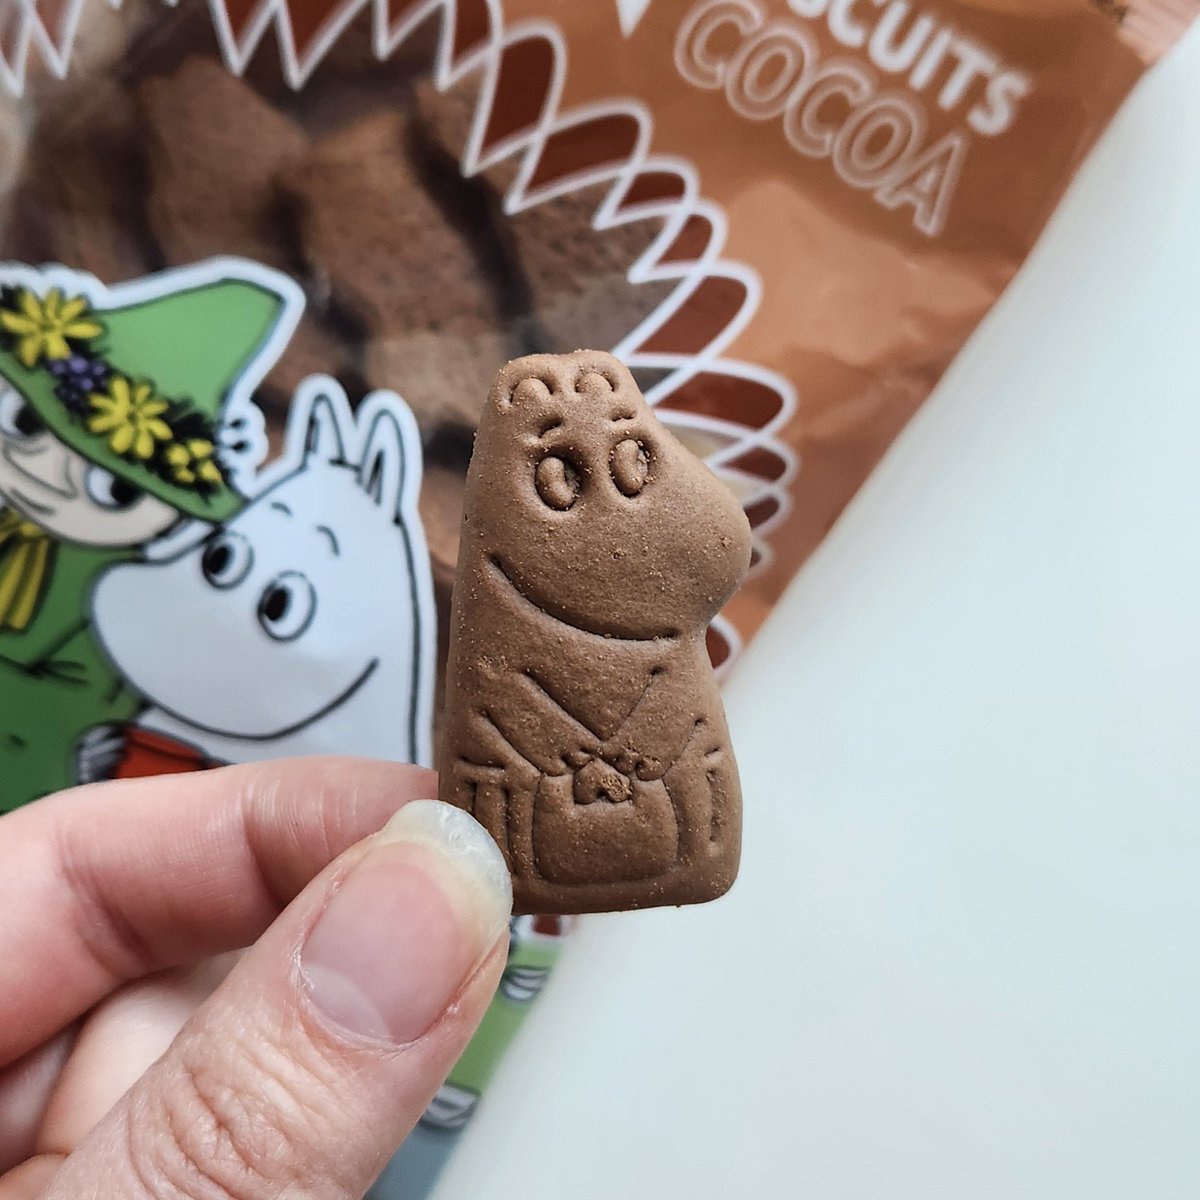 THESE MOOMIN BISCUITS ARE SO CUTE ?! and yummy I'm about to finish the bag